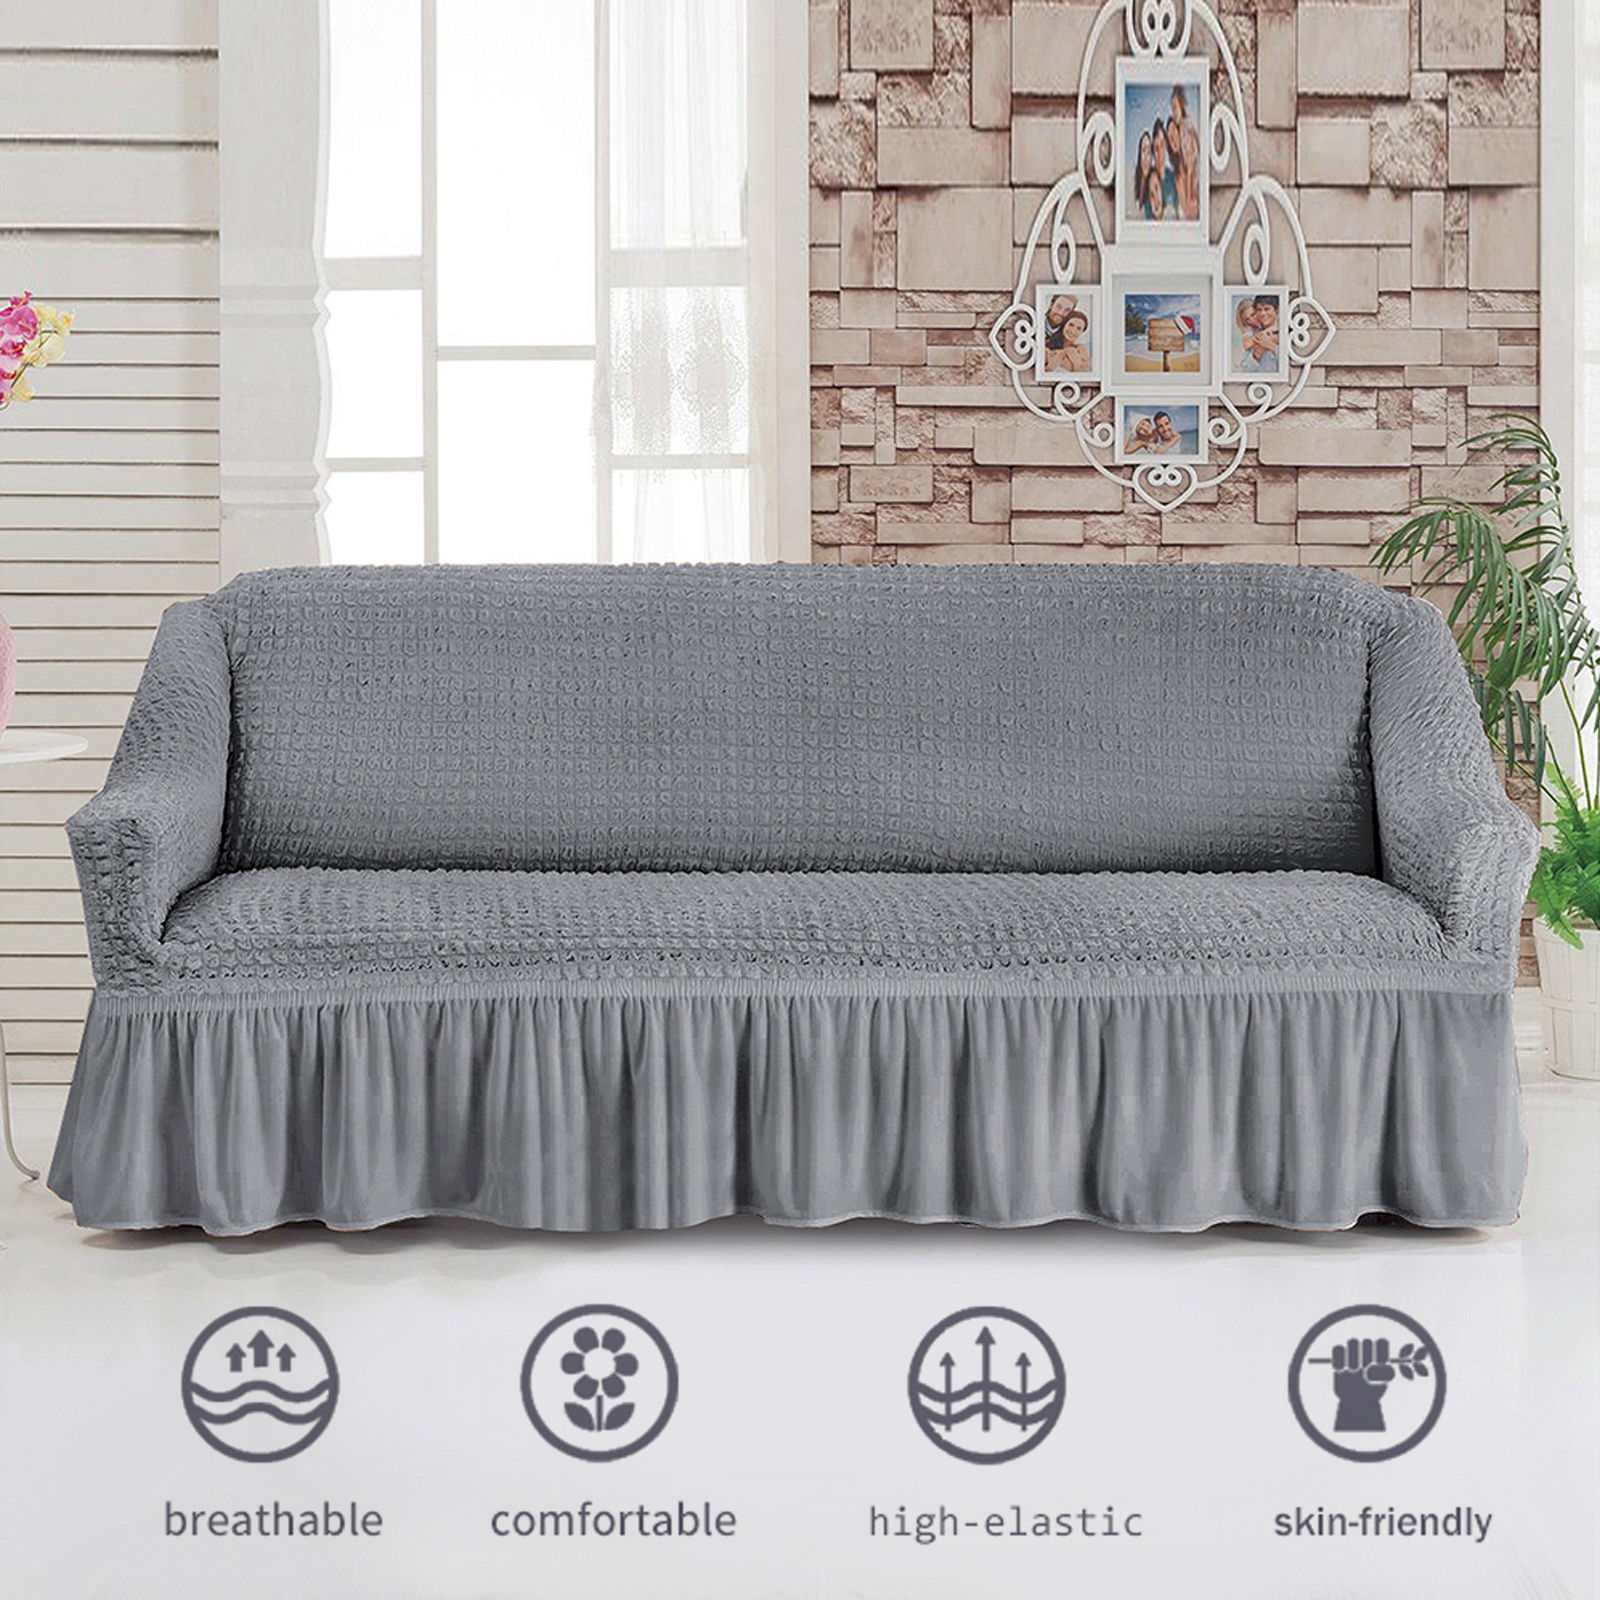 Stretch Sofa Slipcover, 3 Seater Sofa Slipcovers With Skirt With Armless Soft Sofa Cover Elastic Straps Sofa Slipcover For Living Room Kids Pets-Gray B-Small